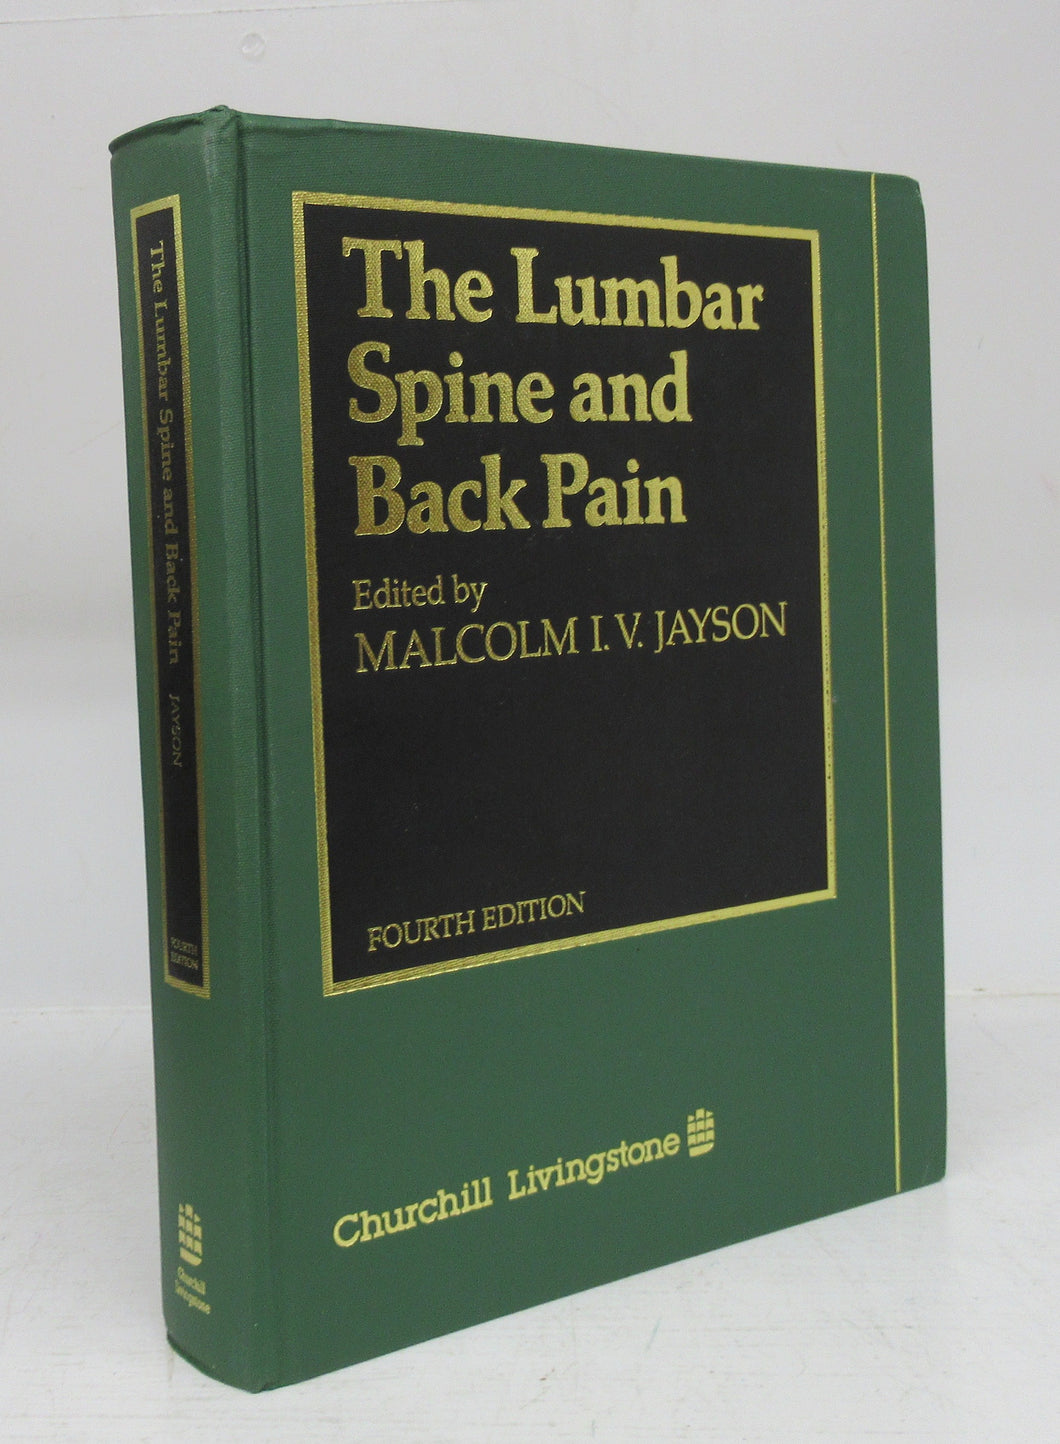 The Lumbar Spine and Back Pain